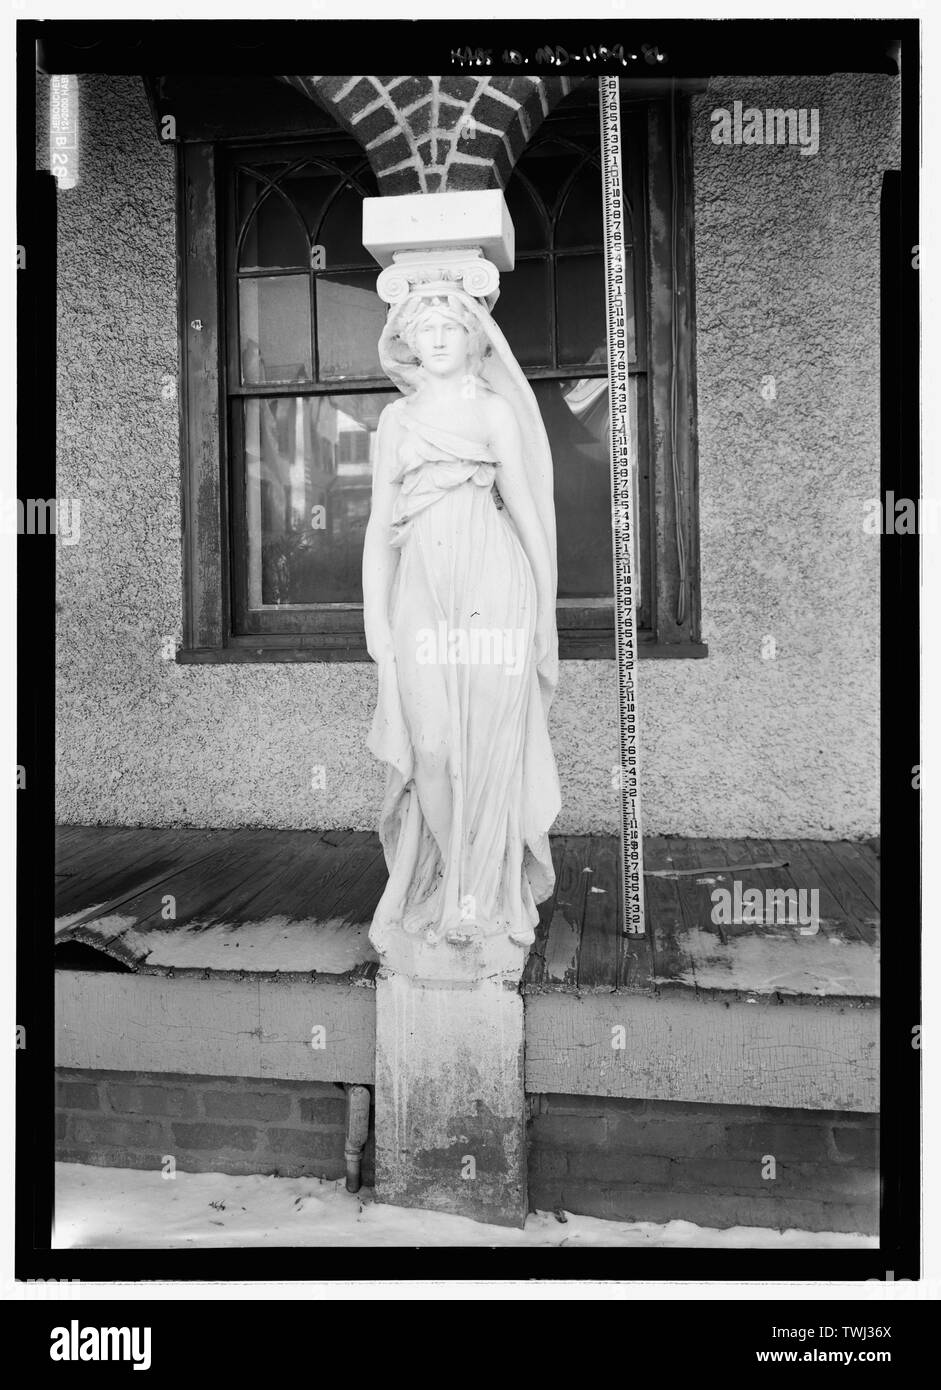 Sculpture, view of one of the caryatids on the Porch of Maidens, with scale - National Park Seminary, Bounded by Capitol Beltway (I-495), Linden Lane, Woodstove Avenue, and Smith Drive, Silver Spring, Montgomery County, MD; U.S.Department of the Army; Ray, Arthur; Cassedy, John Irving, A; Ament, James E; Davis, Roy Tasco; Holman, Emily Elizabeth; Schneider, Thomas Franklin; Rosenthal, James, field team; Price, Virginia B, transmitter; Ott, Cynthia, historian; Boucher, Jack E, photographer; Lavoie, Catherine C, project manager; Price, Virginia B, transmitter; Price, Virginia B, transmitter Stock Photo